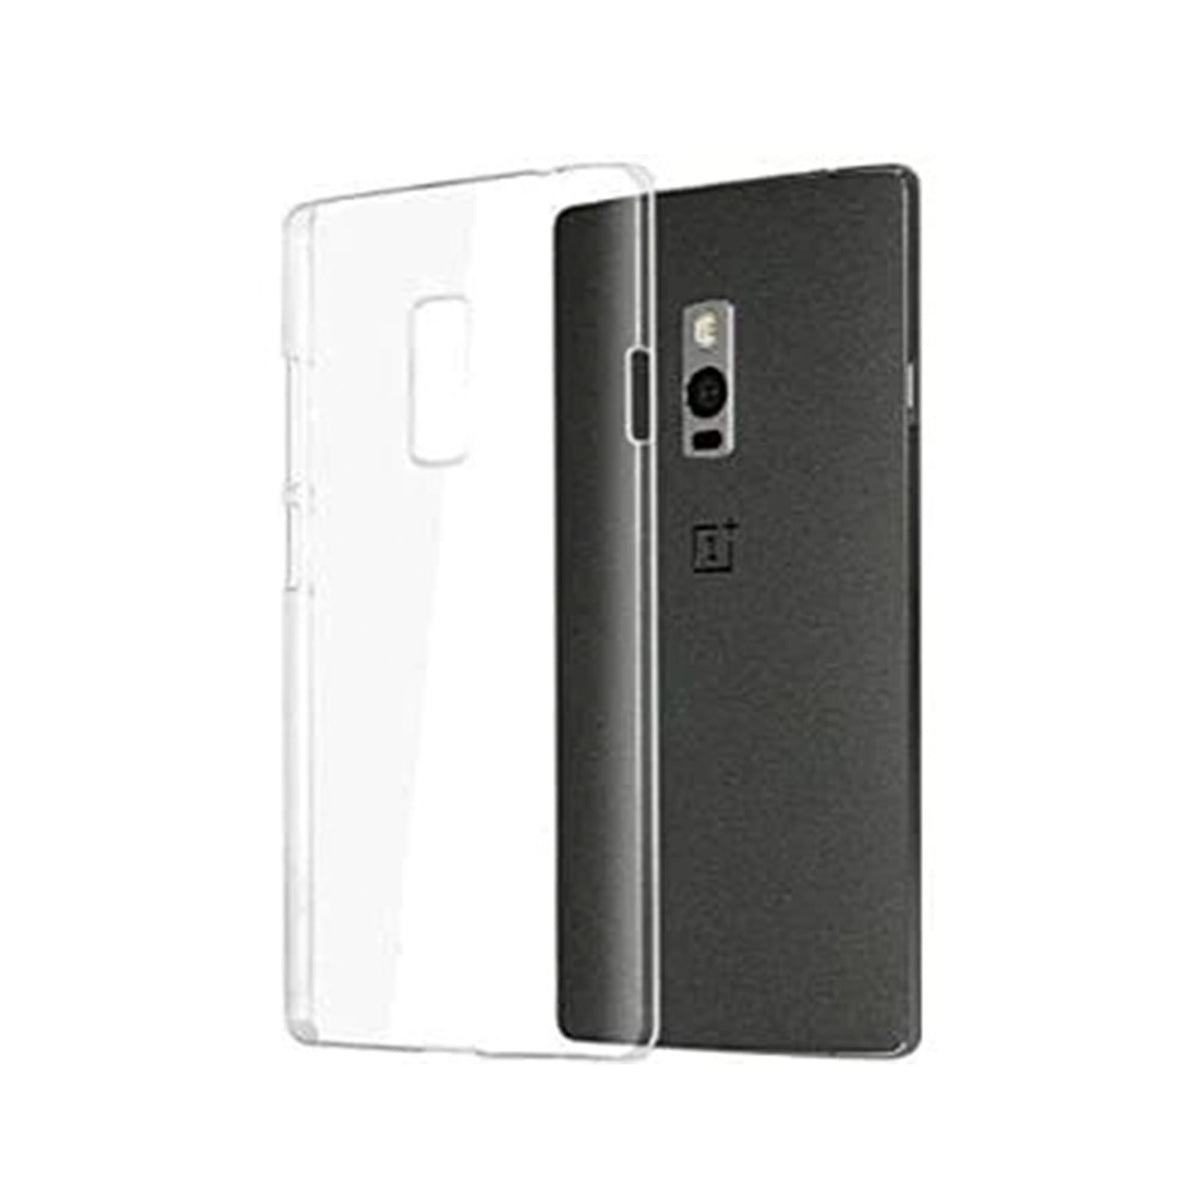 Back Cover For ONEPLUS 1, Ultra Hybrid Clear Camera Protection, TPU Case, Shockproof (Multicolor As Per Availability)